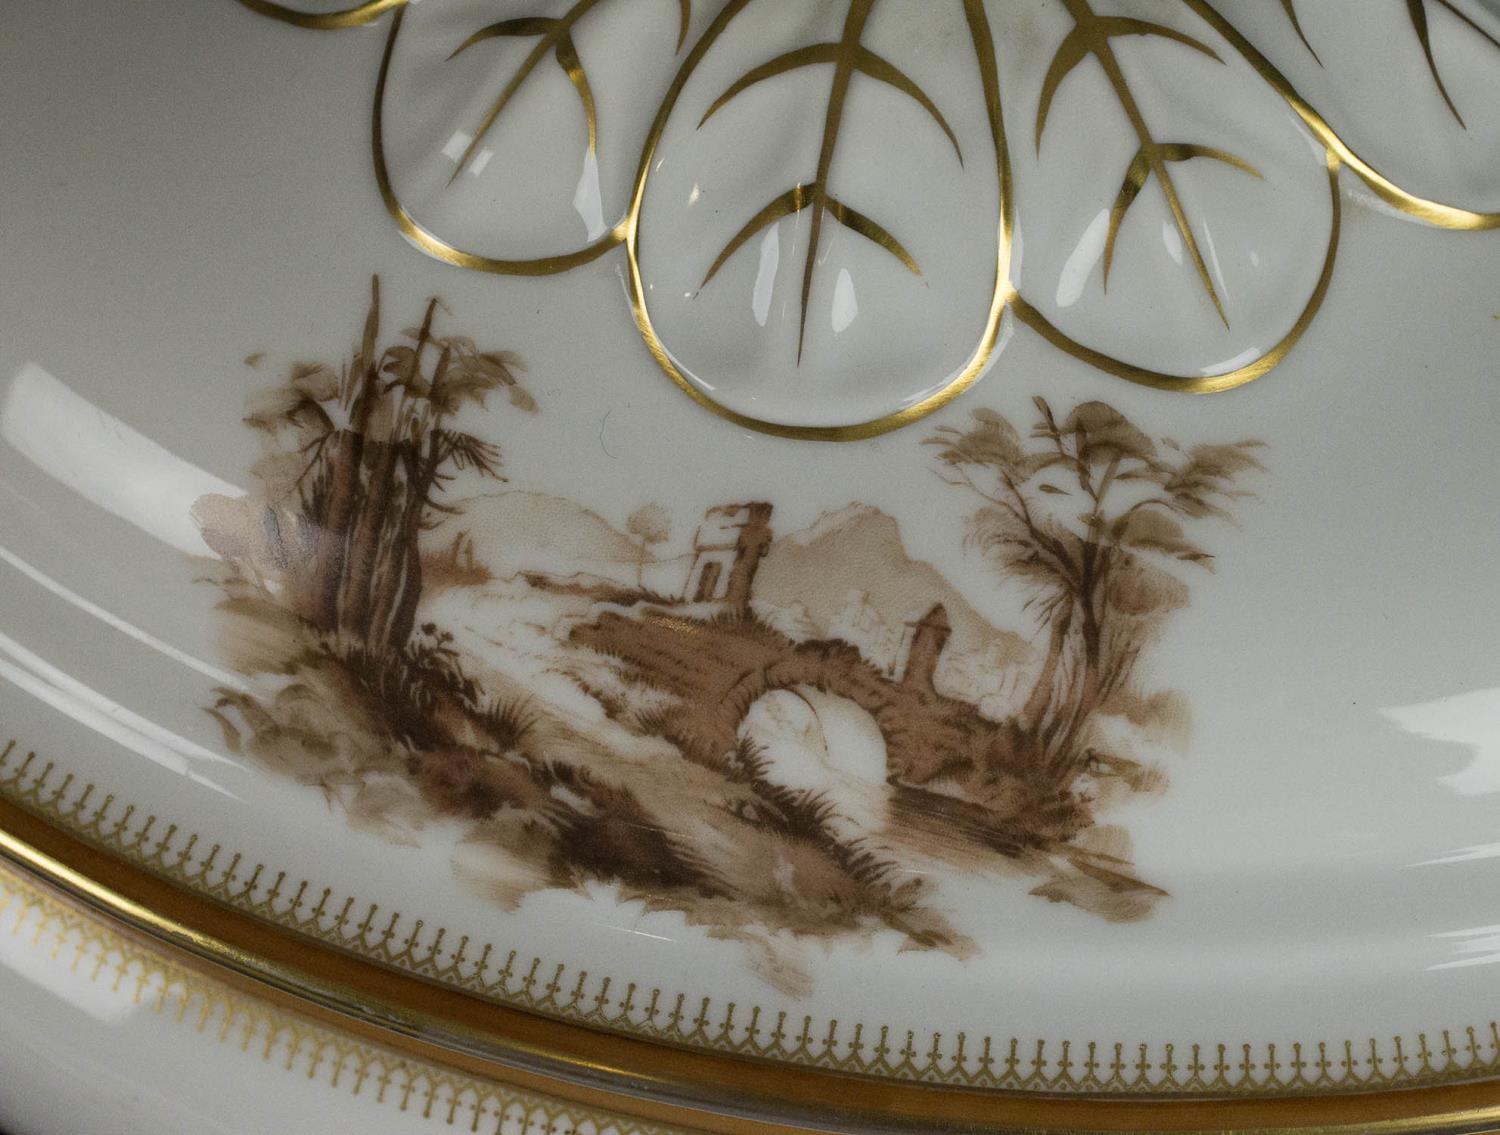 DINNER SERVICE, Vista Alegre twelve place setting including plates, soup bowls cheese/bread - Image 6 of 6